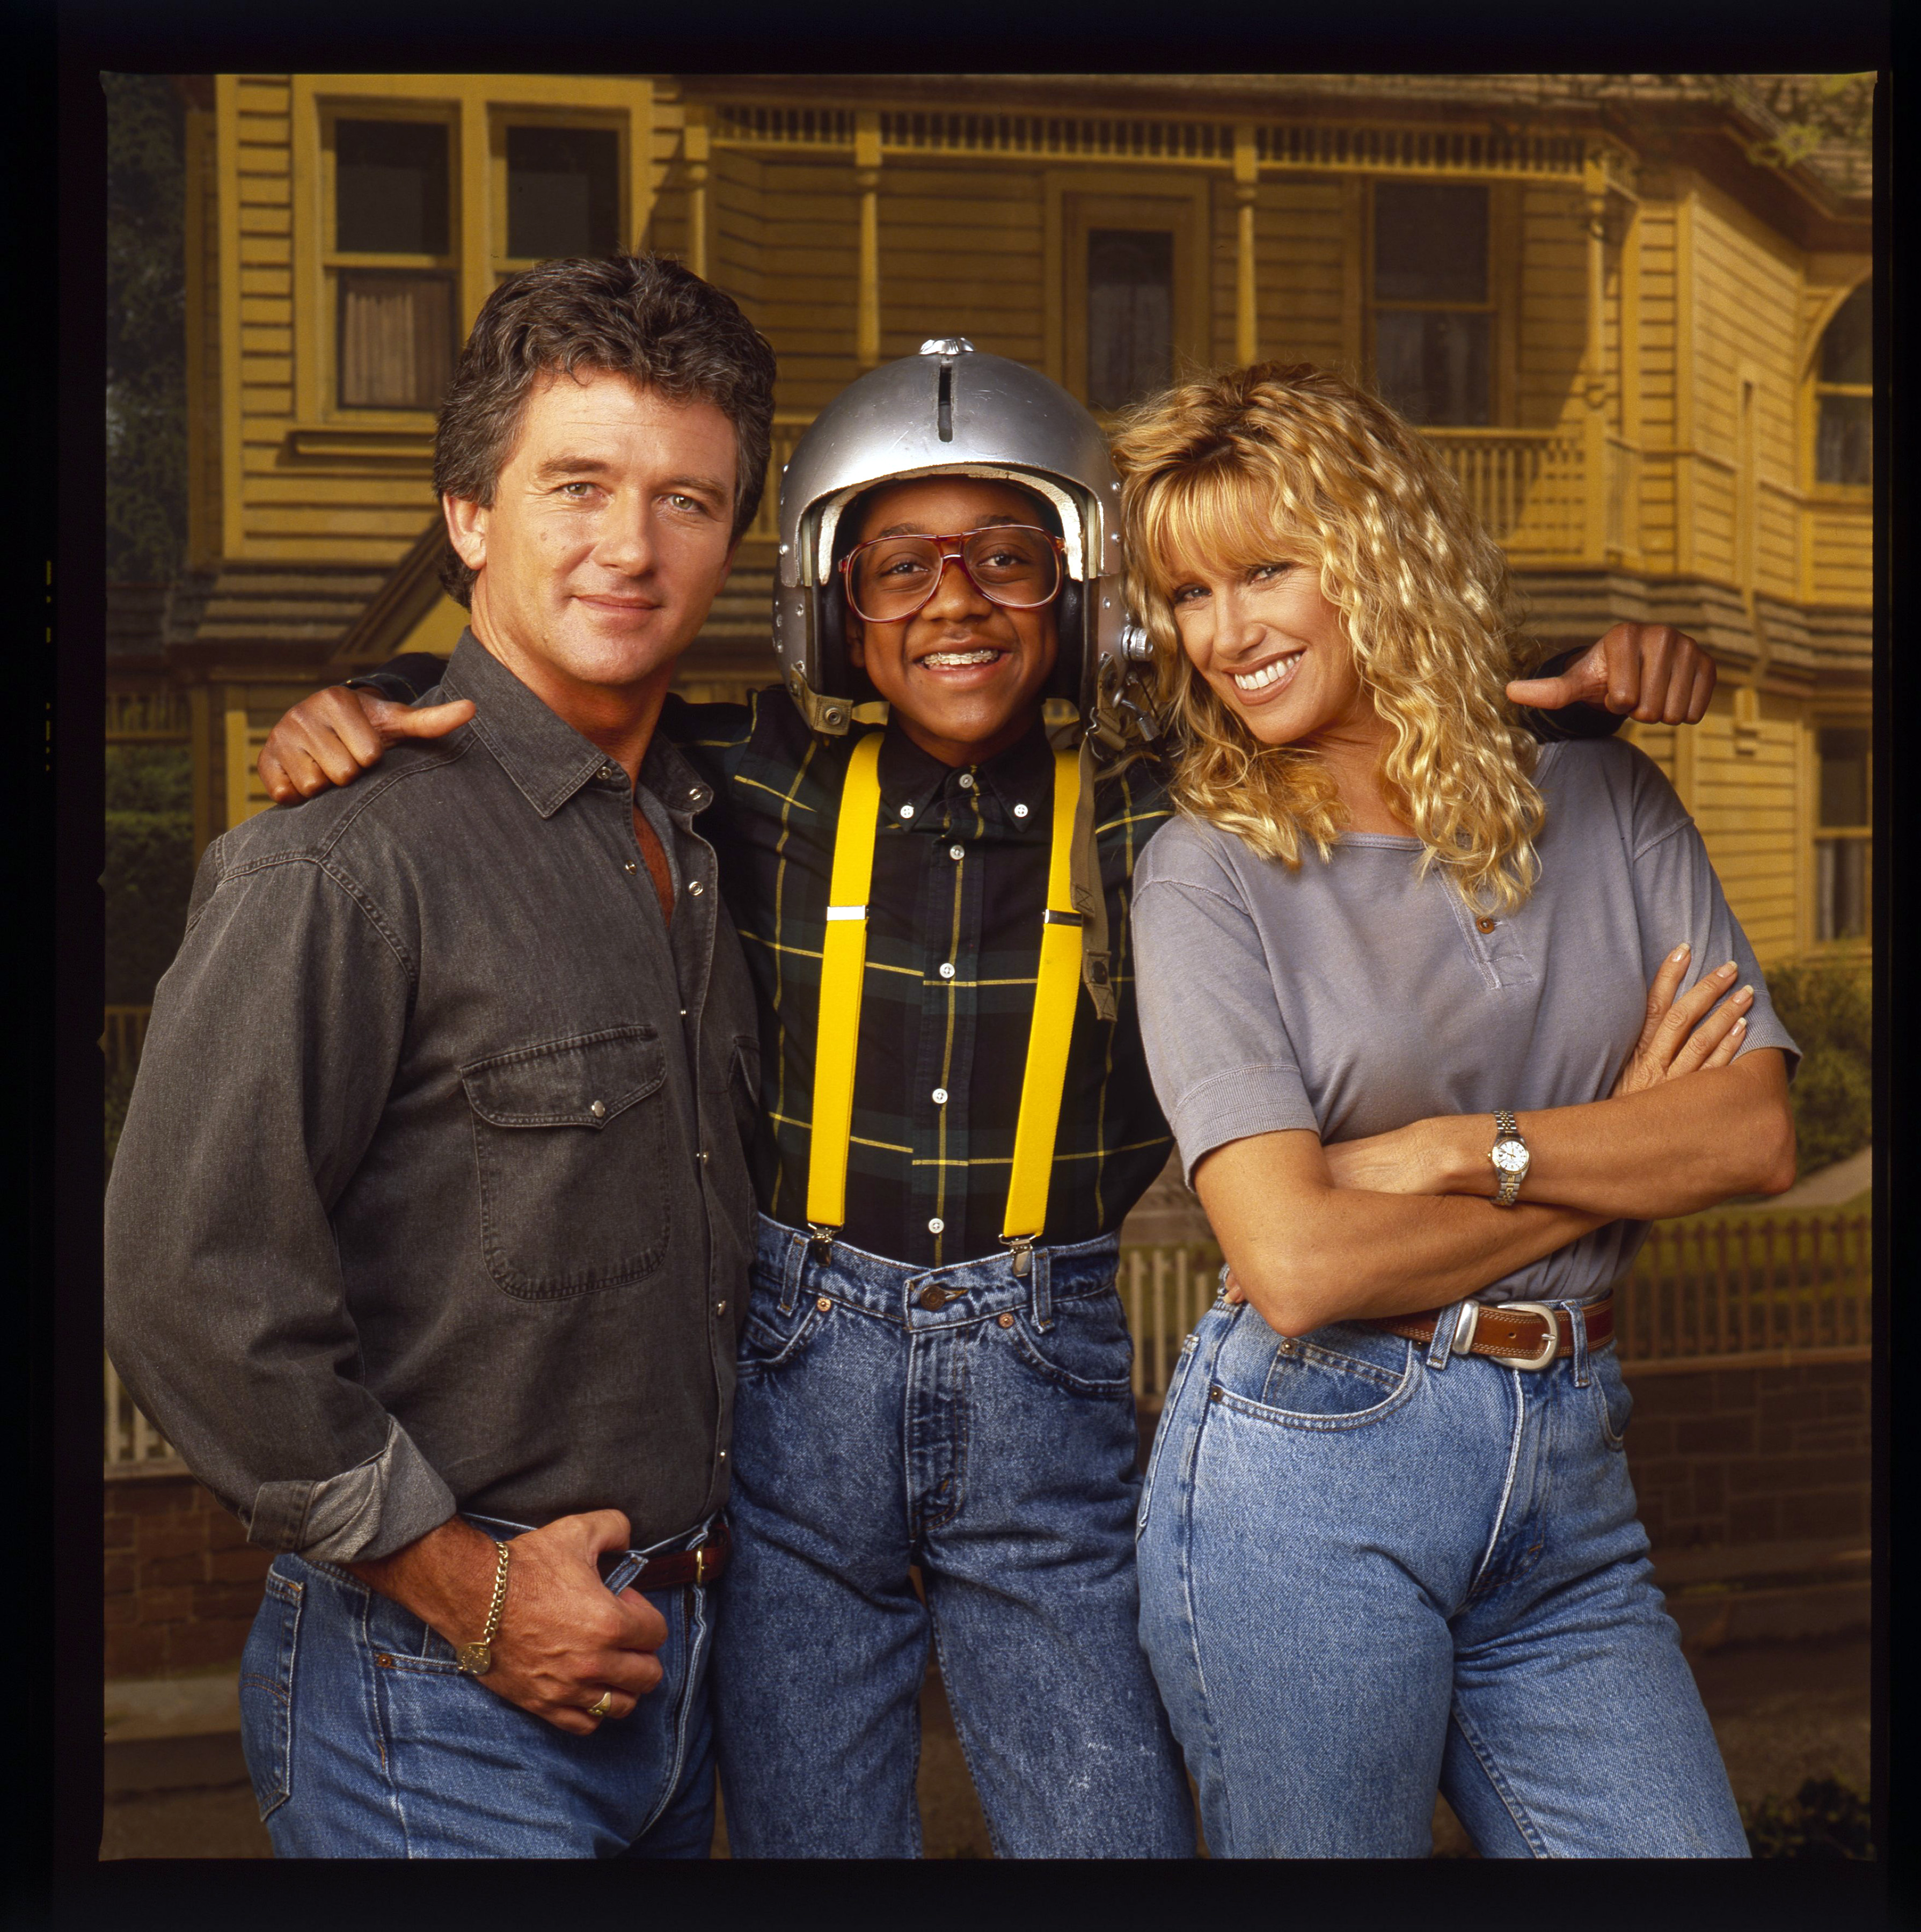 Patrick Duffy and Suzanne Somers with their guest star Jaleel White dressed as Steve Urkel on "Step By Step" on August 23, 1991 | Source: Getty Images